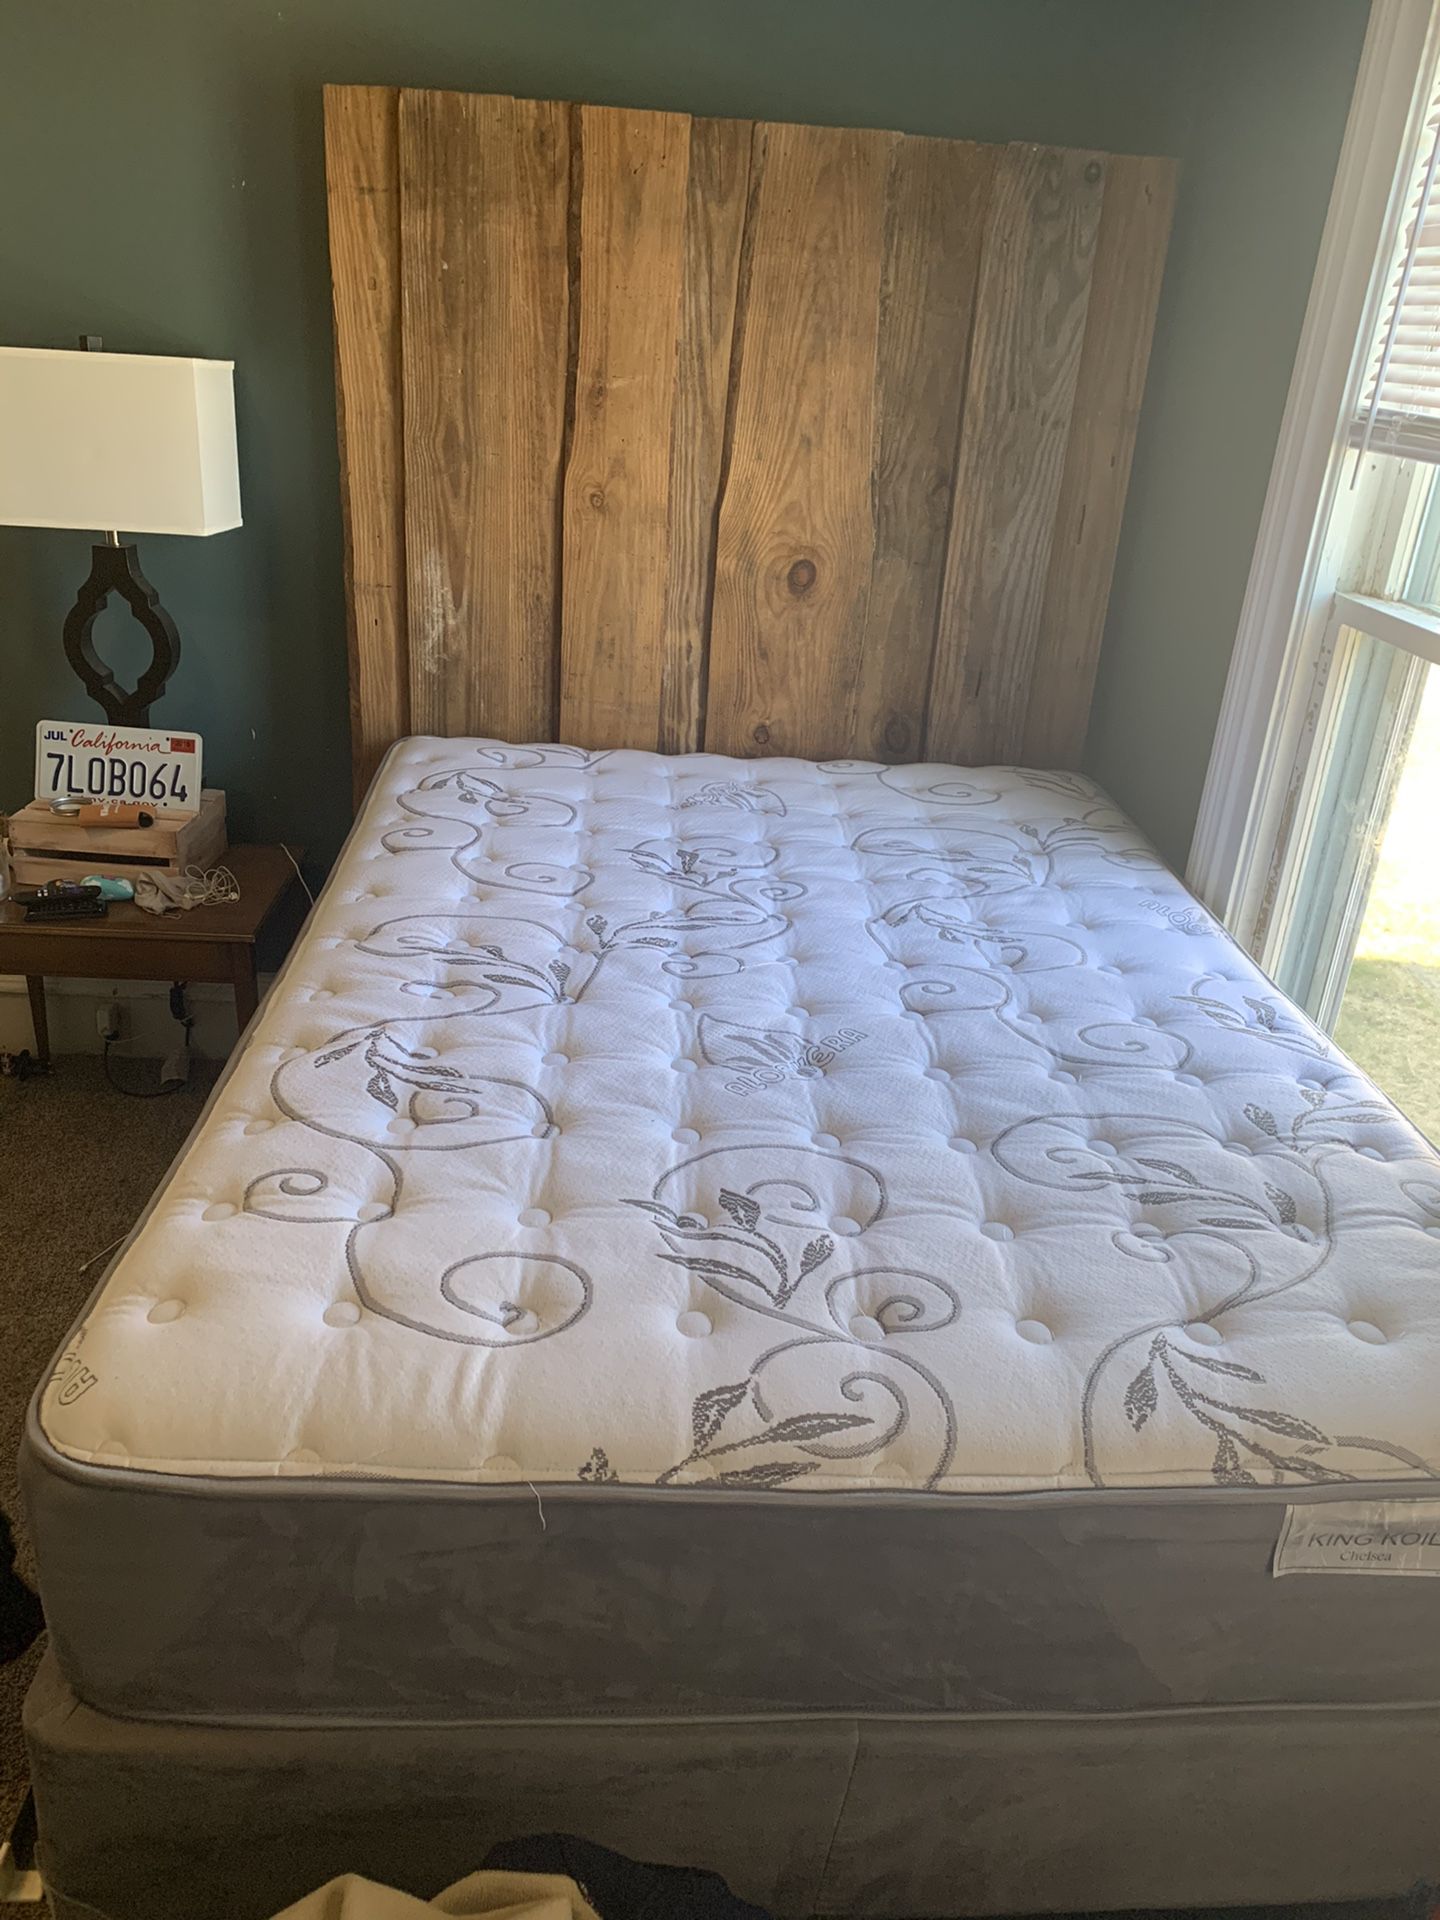 Aloe Vera infused pillow top full size mattress and box spring